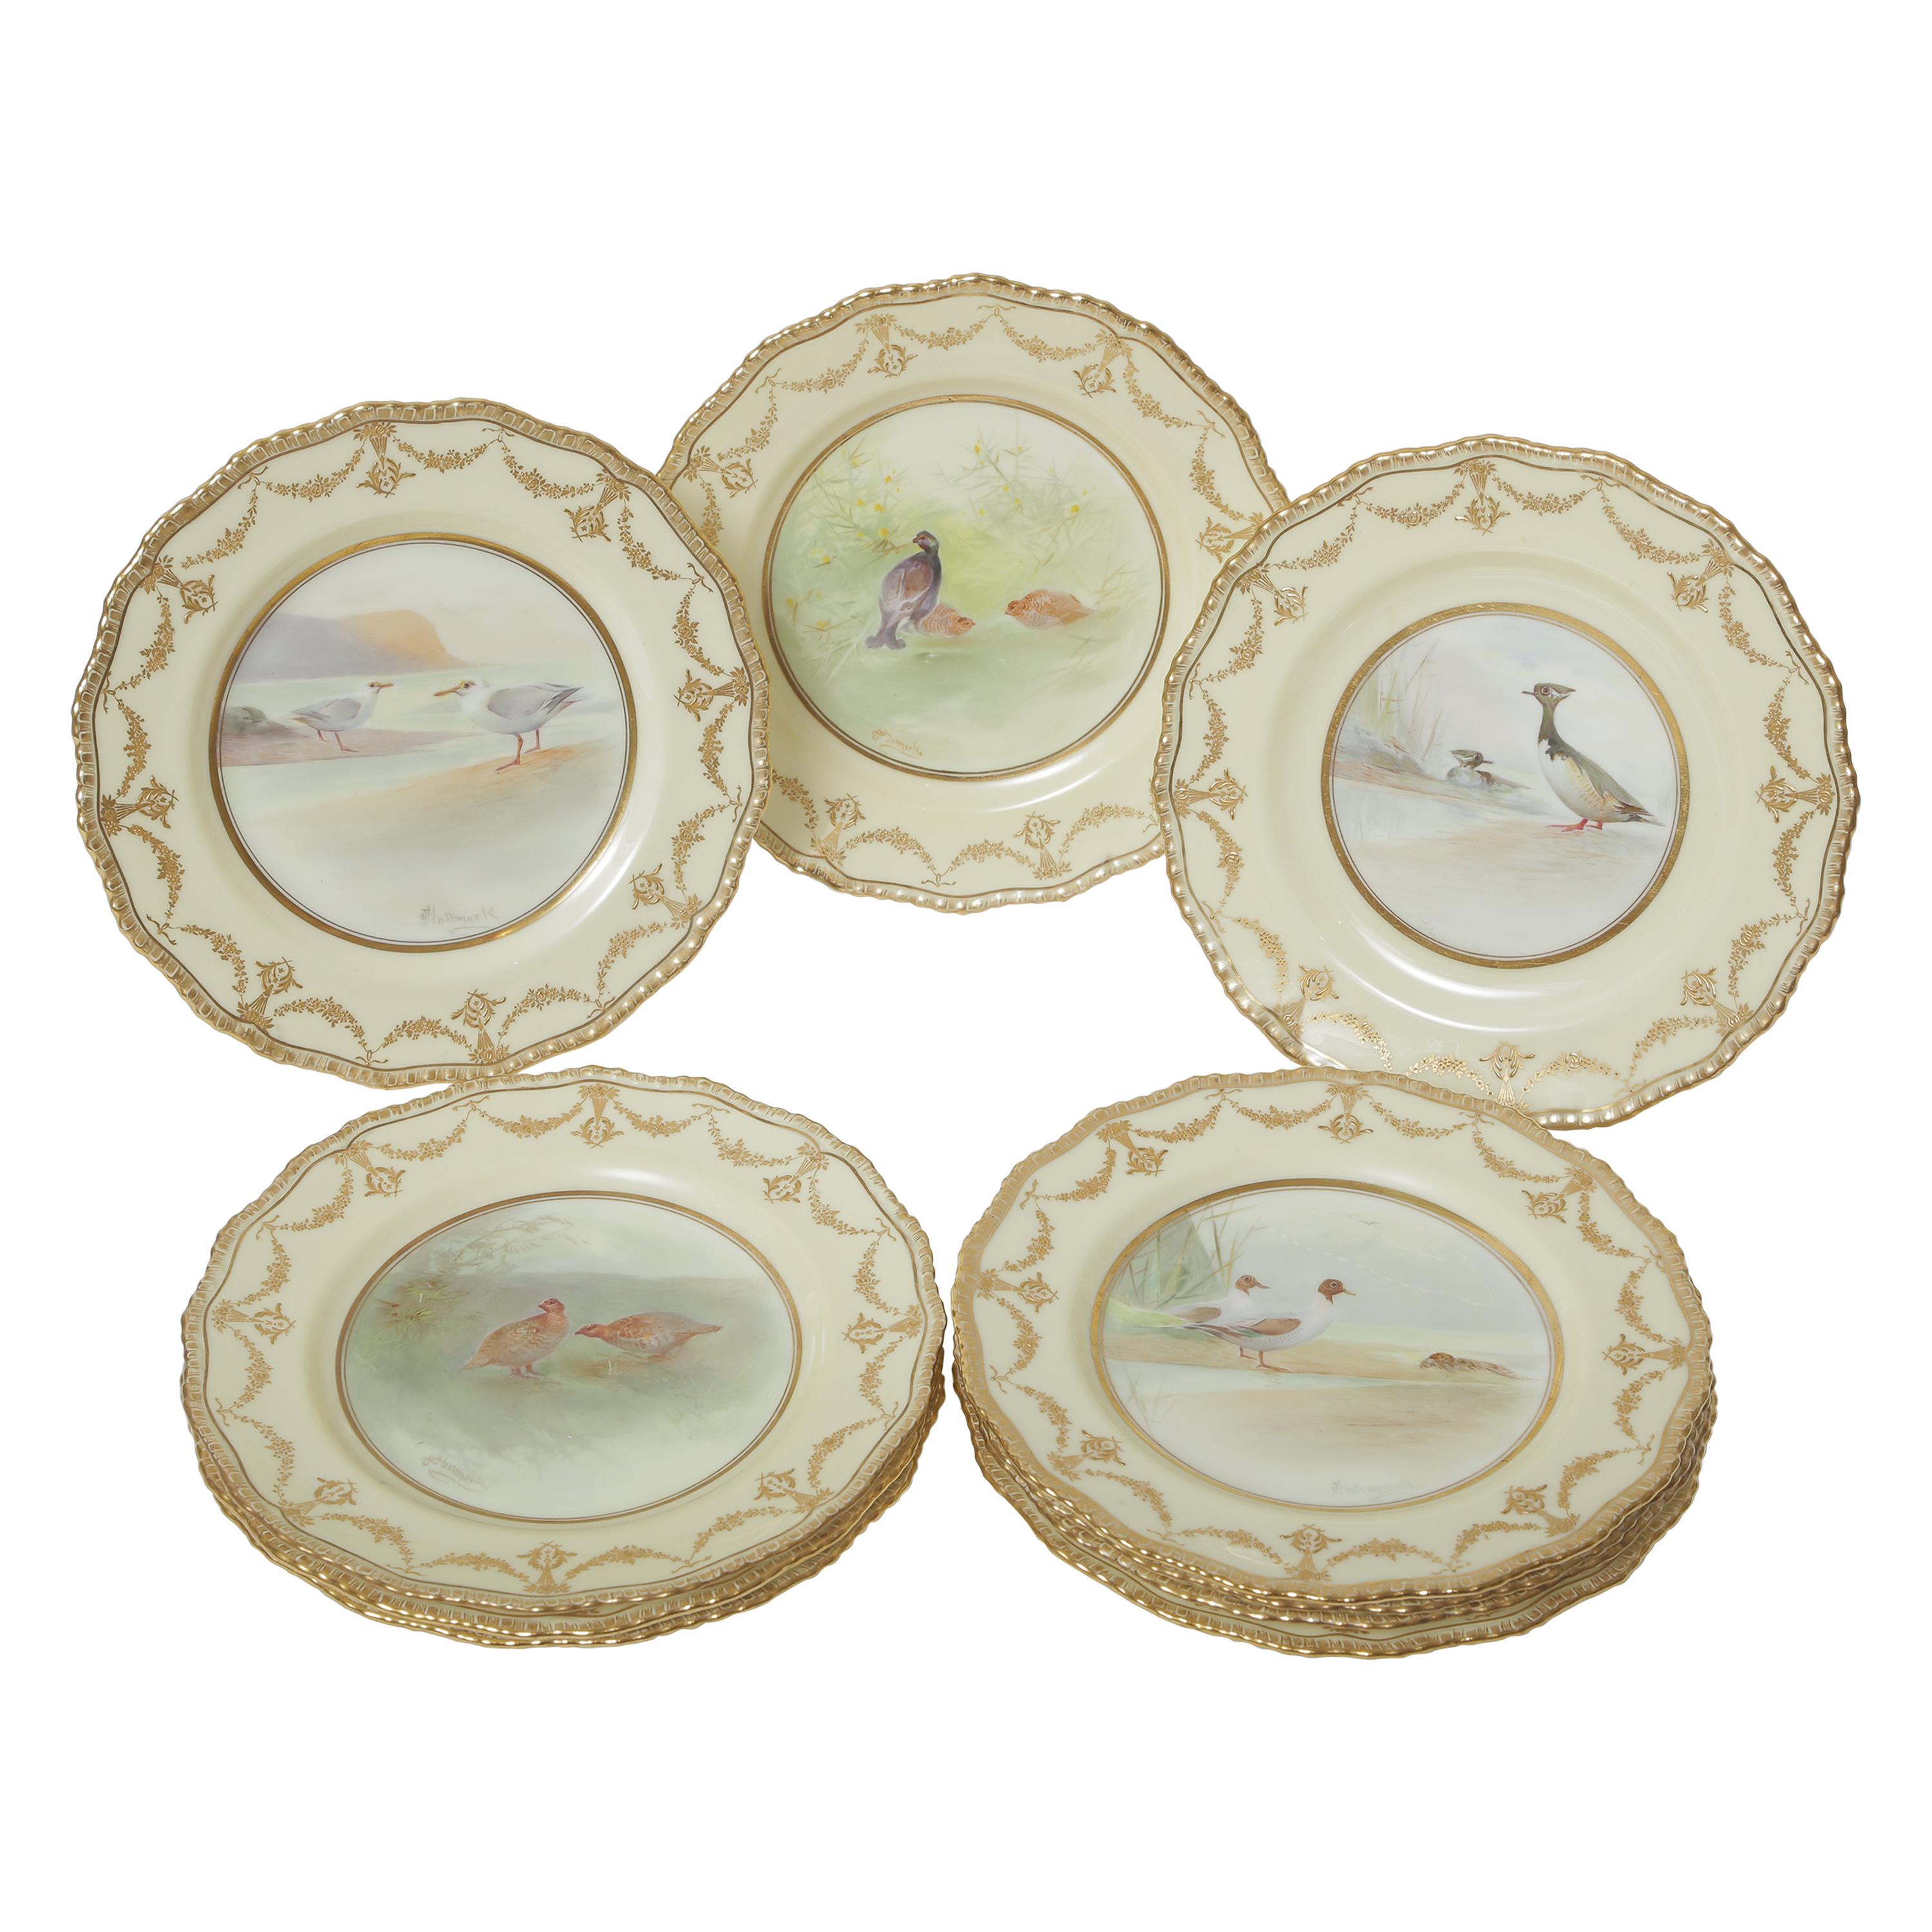 Ten Hand Painted Game Bird Plates, Raised Gold Accents, Antique English